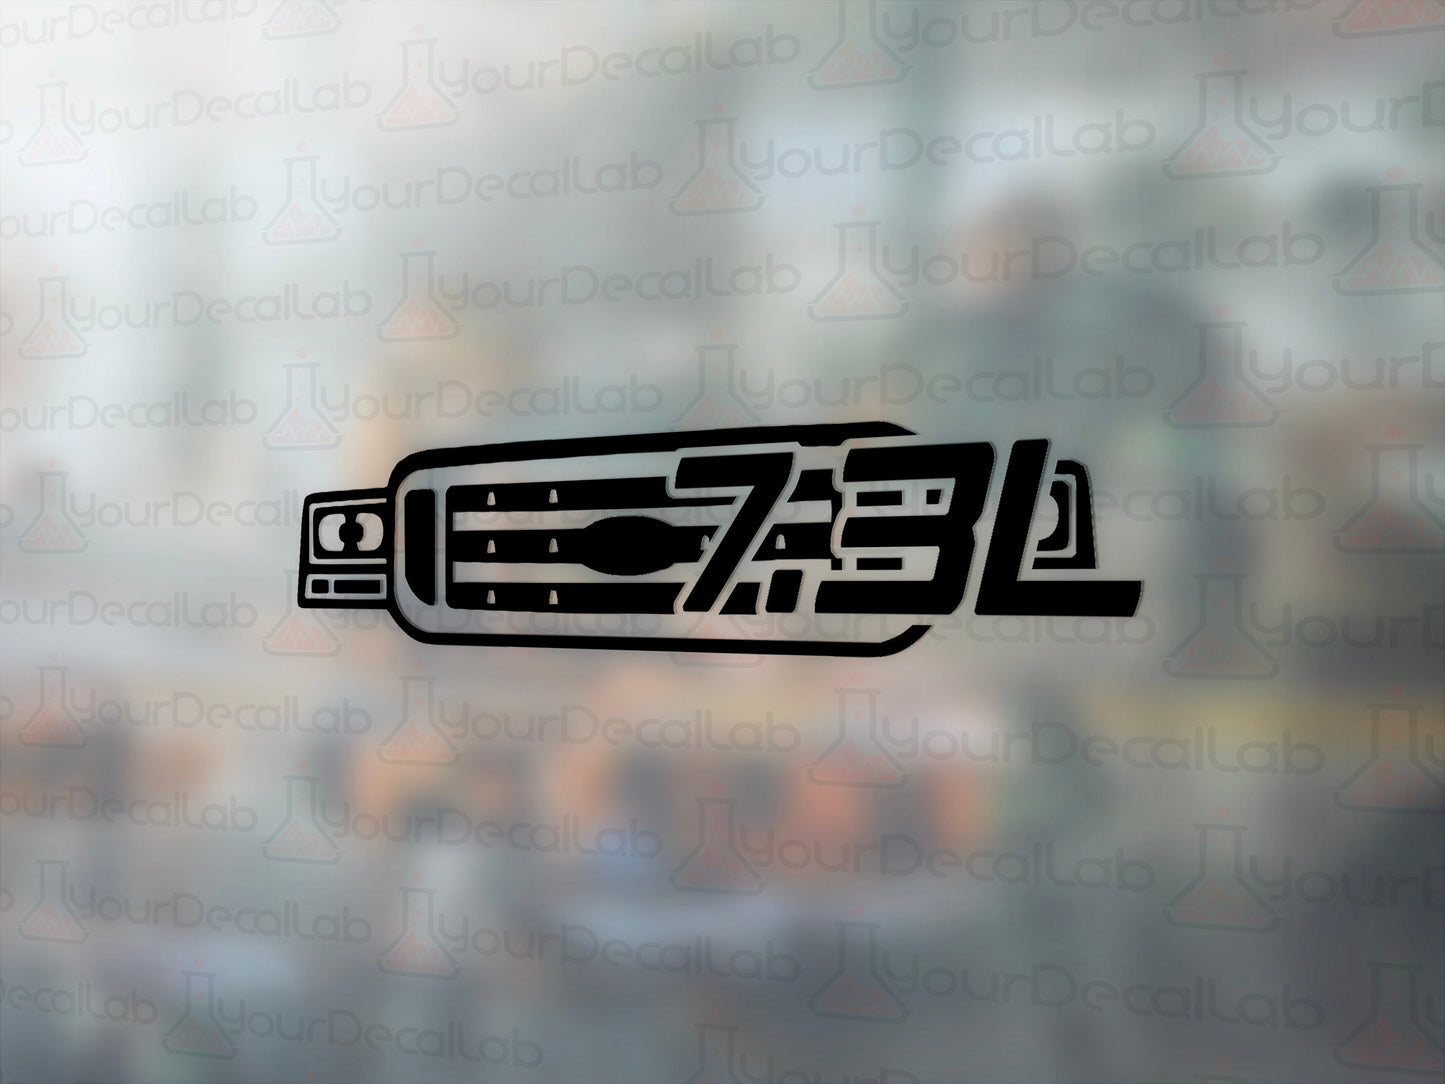 7.3L Grille Decal - Many Colors & Sizes